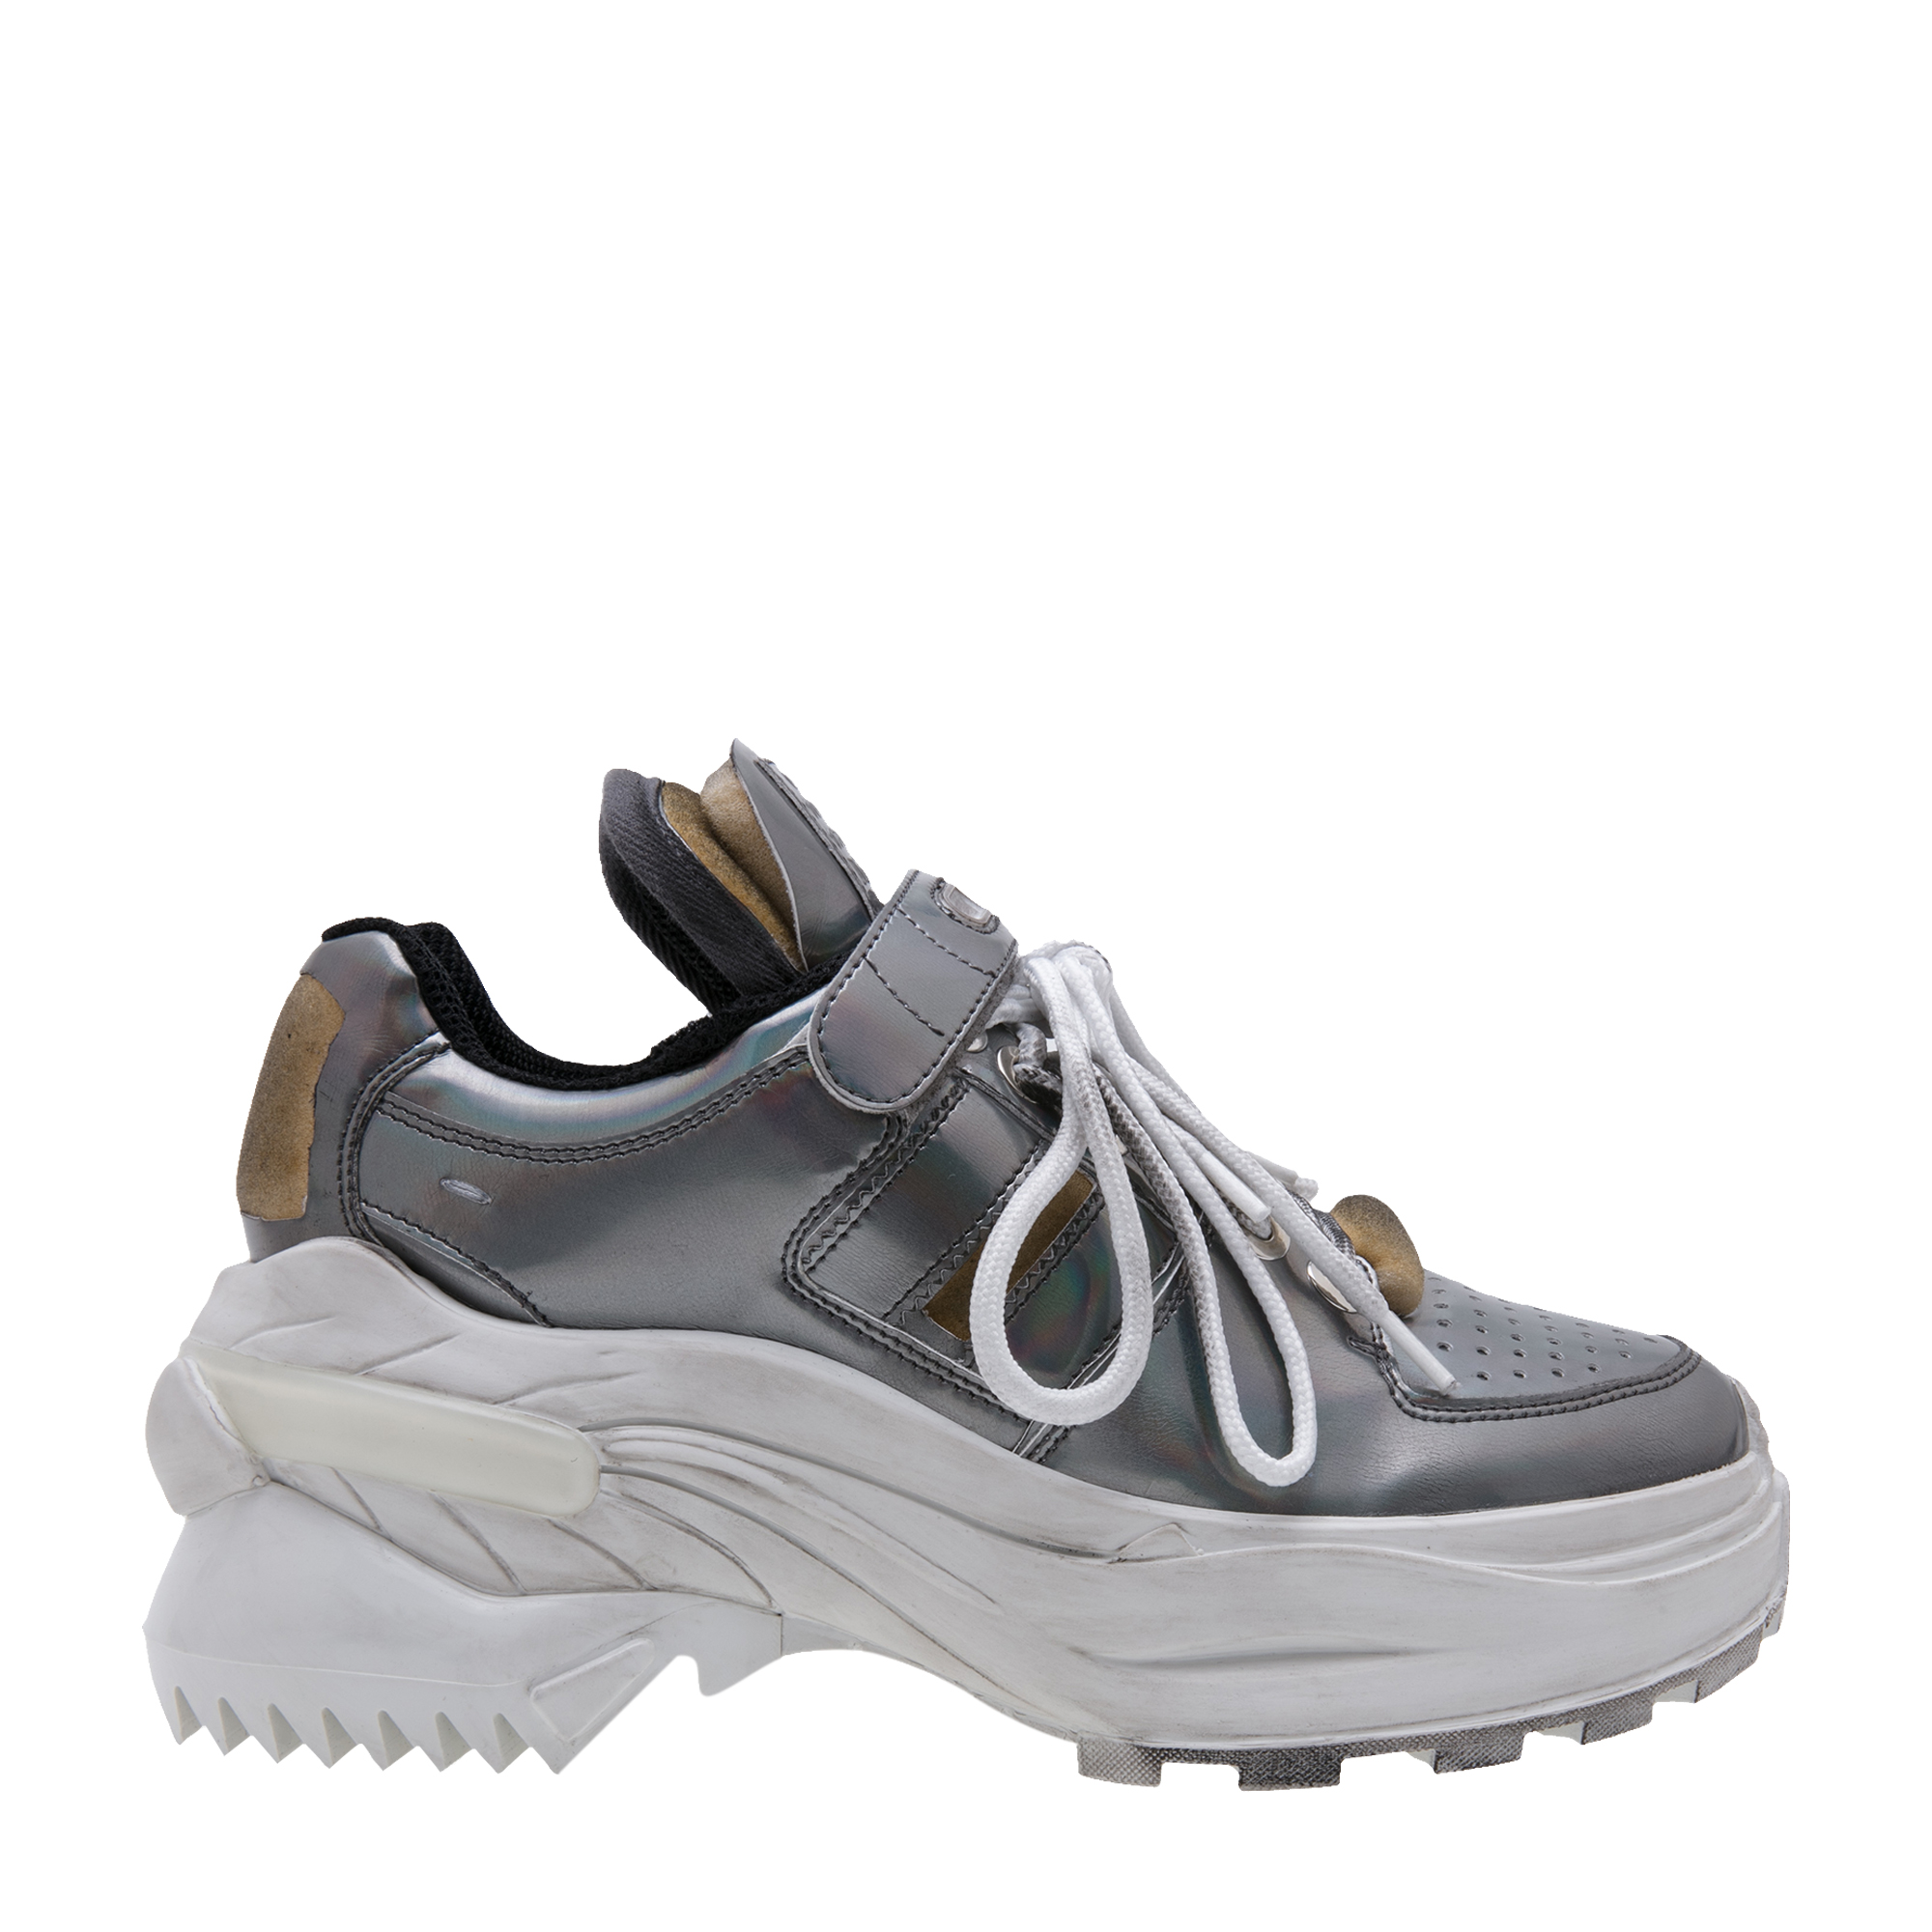 Maison Margiela Chunky sneakers for Women - Grey in UAE | Level Shoes